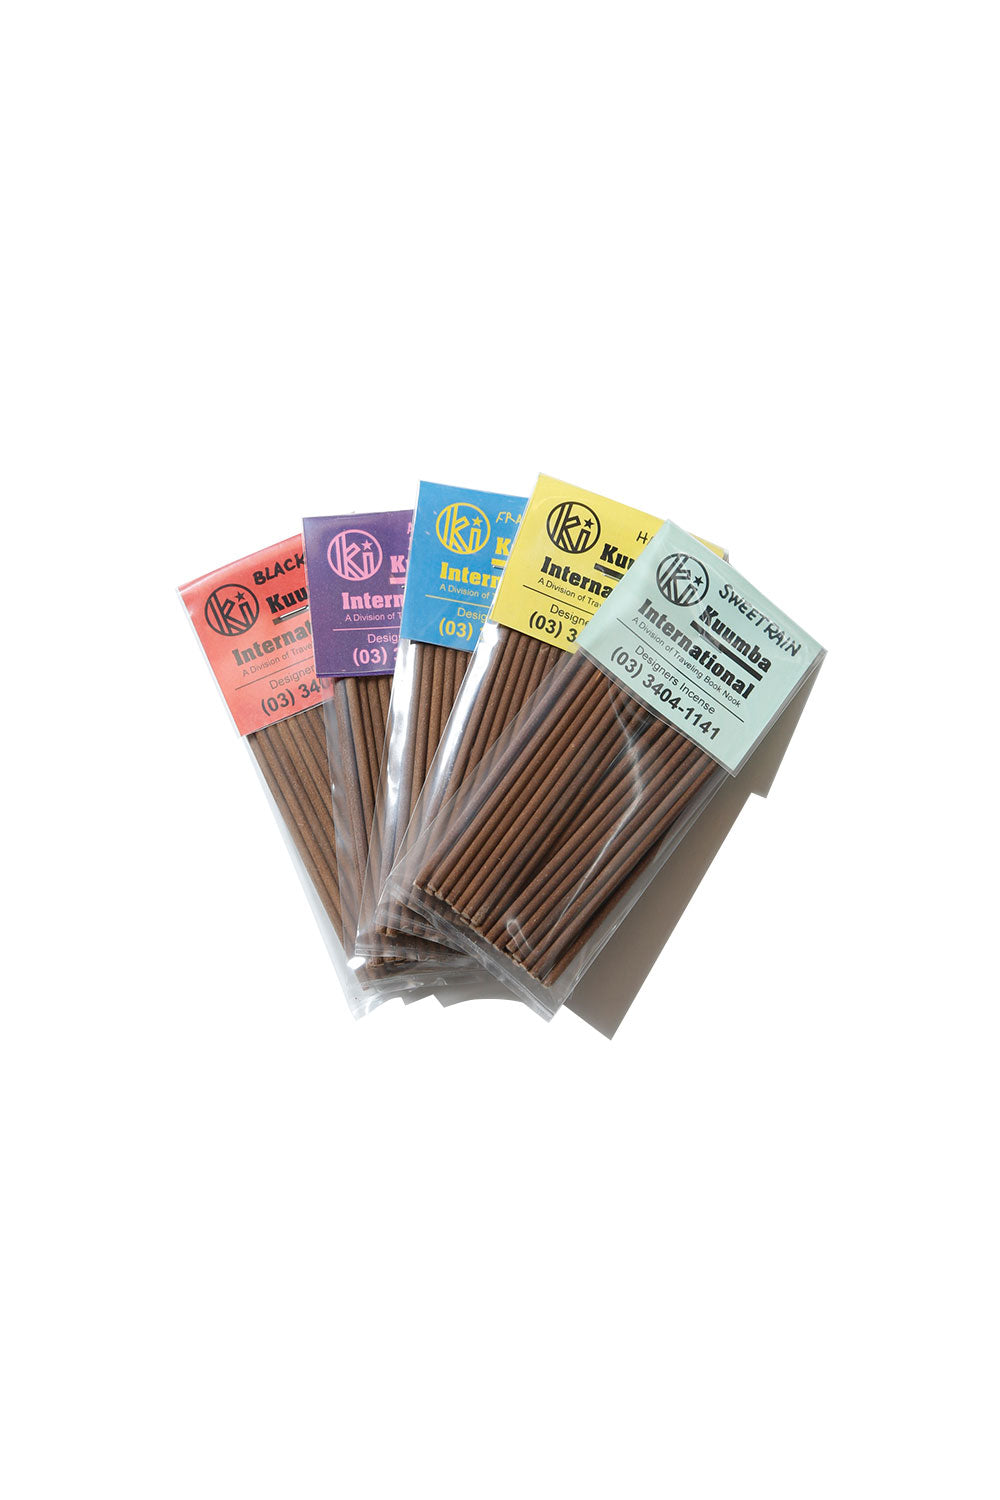 The KUUMBA - DESIGNERS INCENSE 30 PACK 1/2 SIZE  available online with global shipping, and in PAM Stores Melbourne and Sydney.